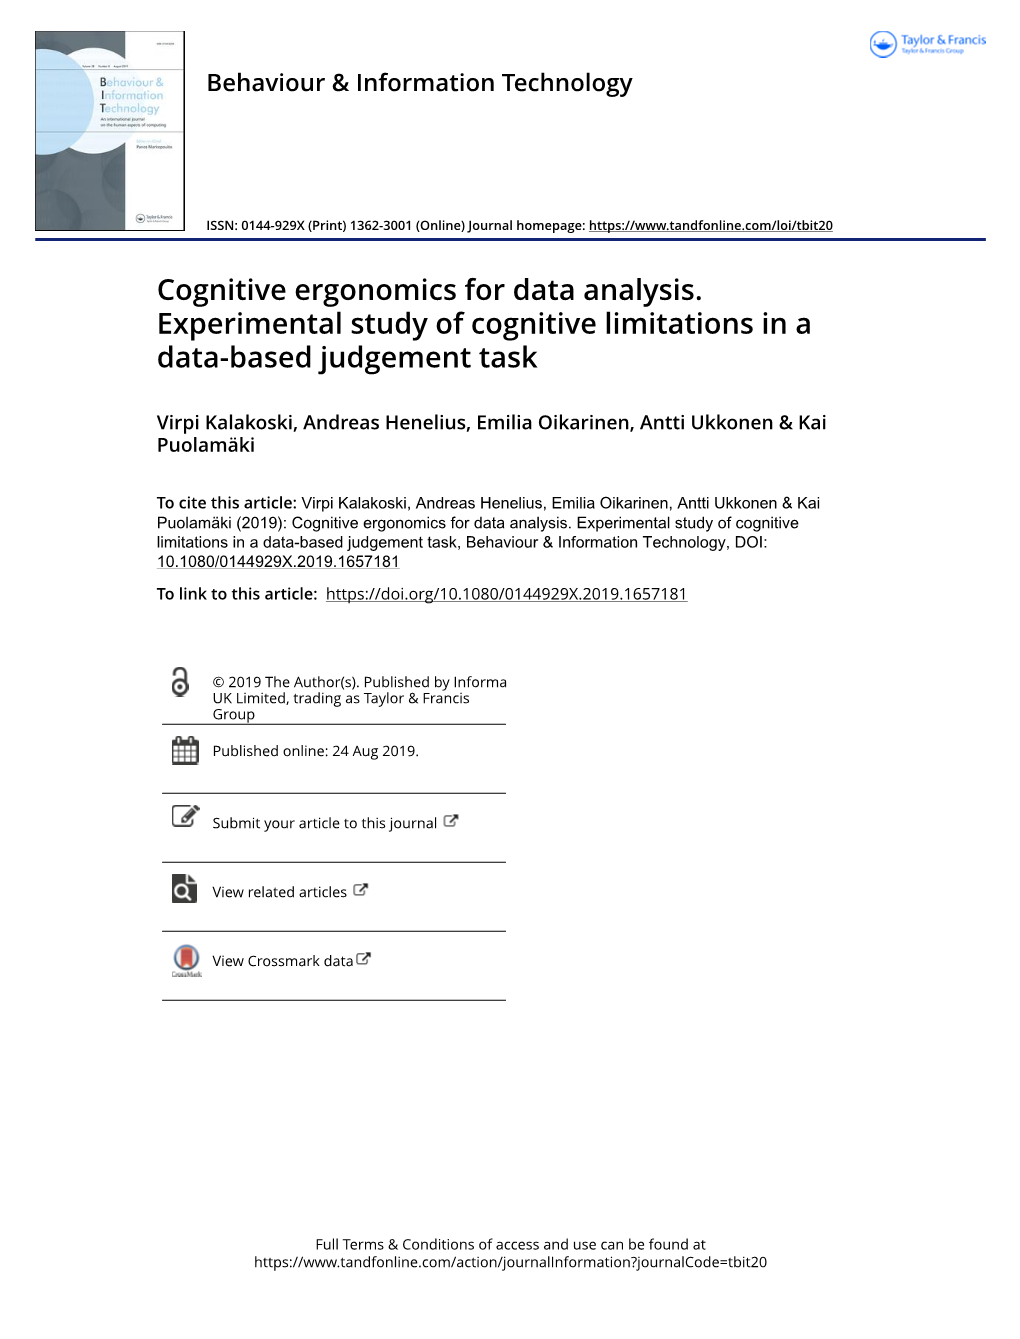 Cognitive Ergonomics for Data Analysis. Experimental Study of Cognitive Limitations in a Data-Based Judgement Task